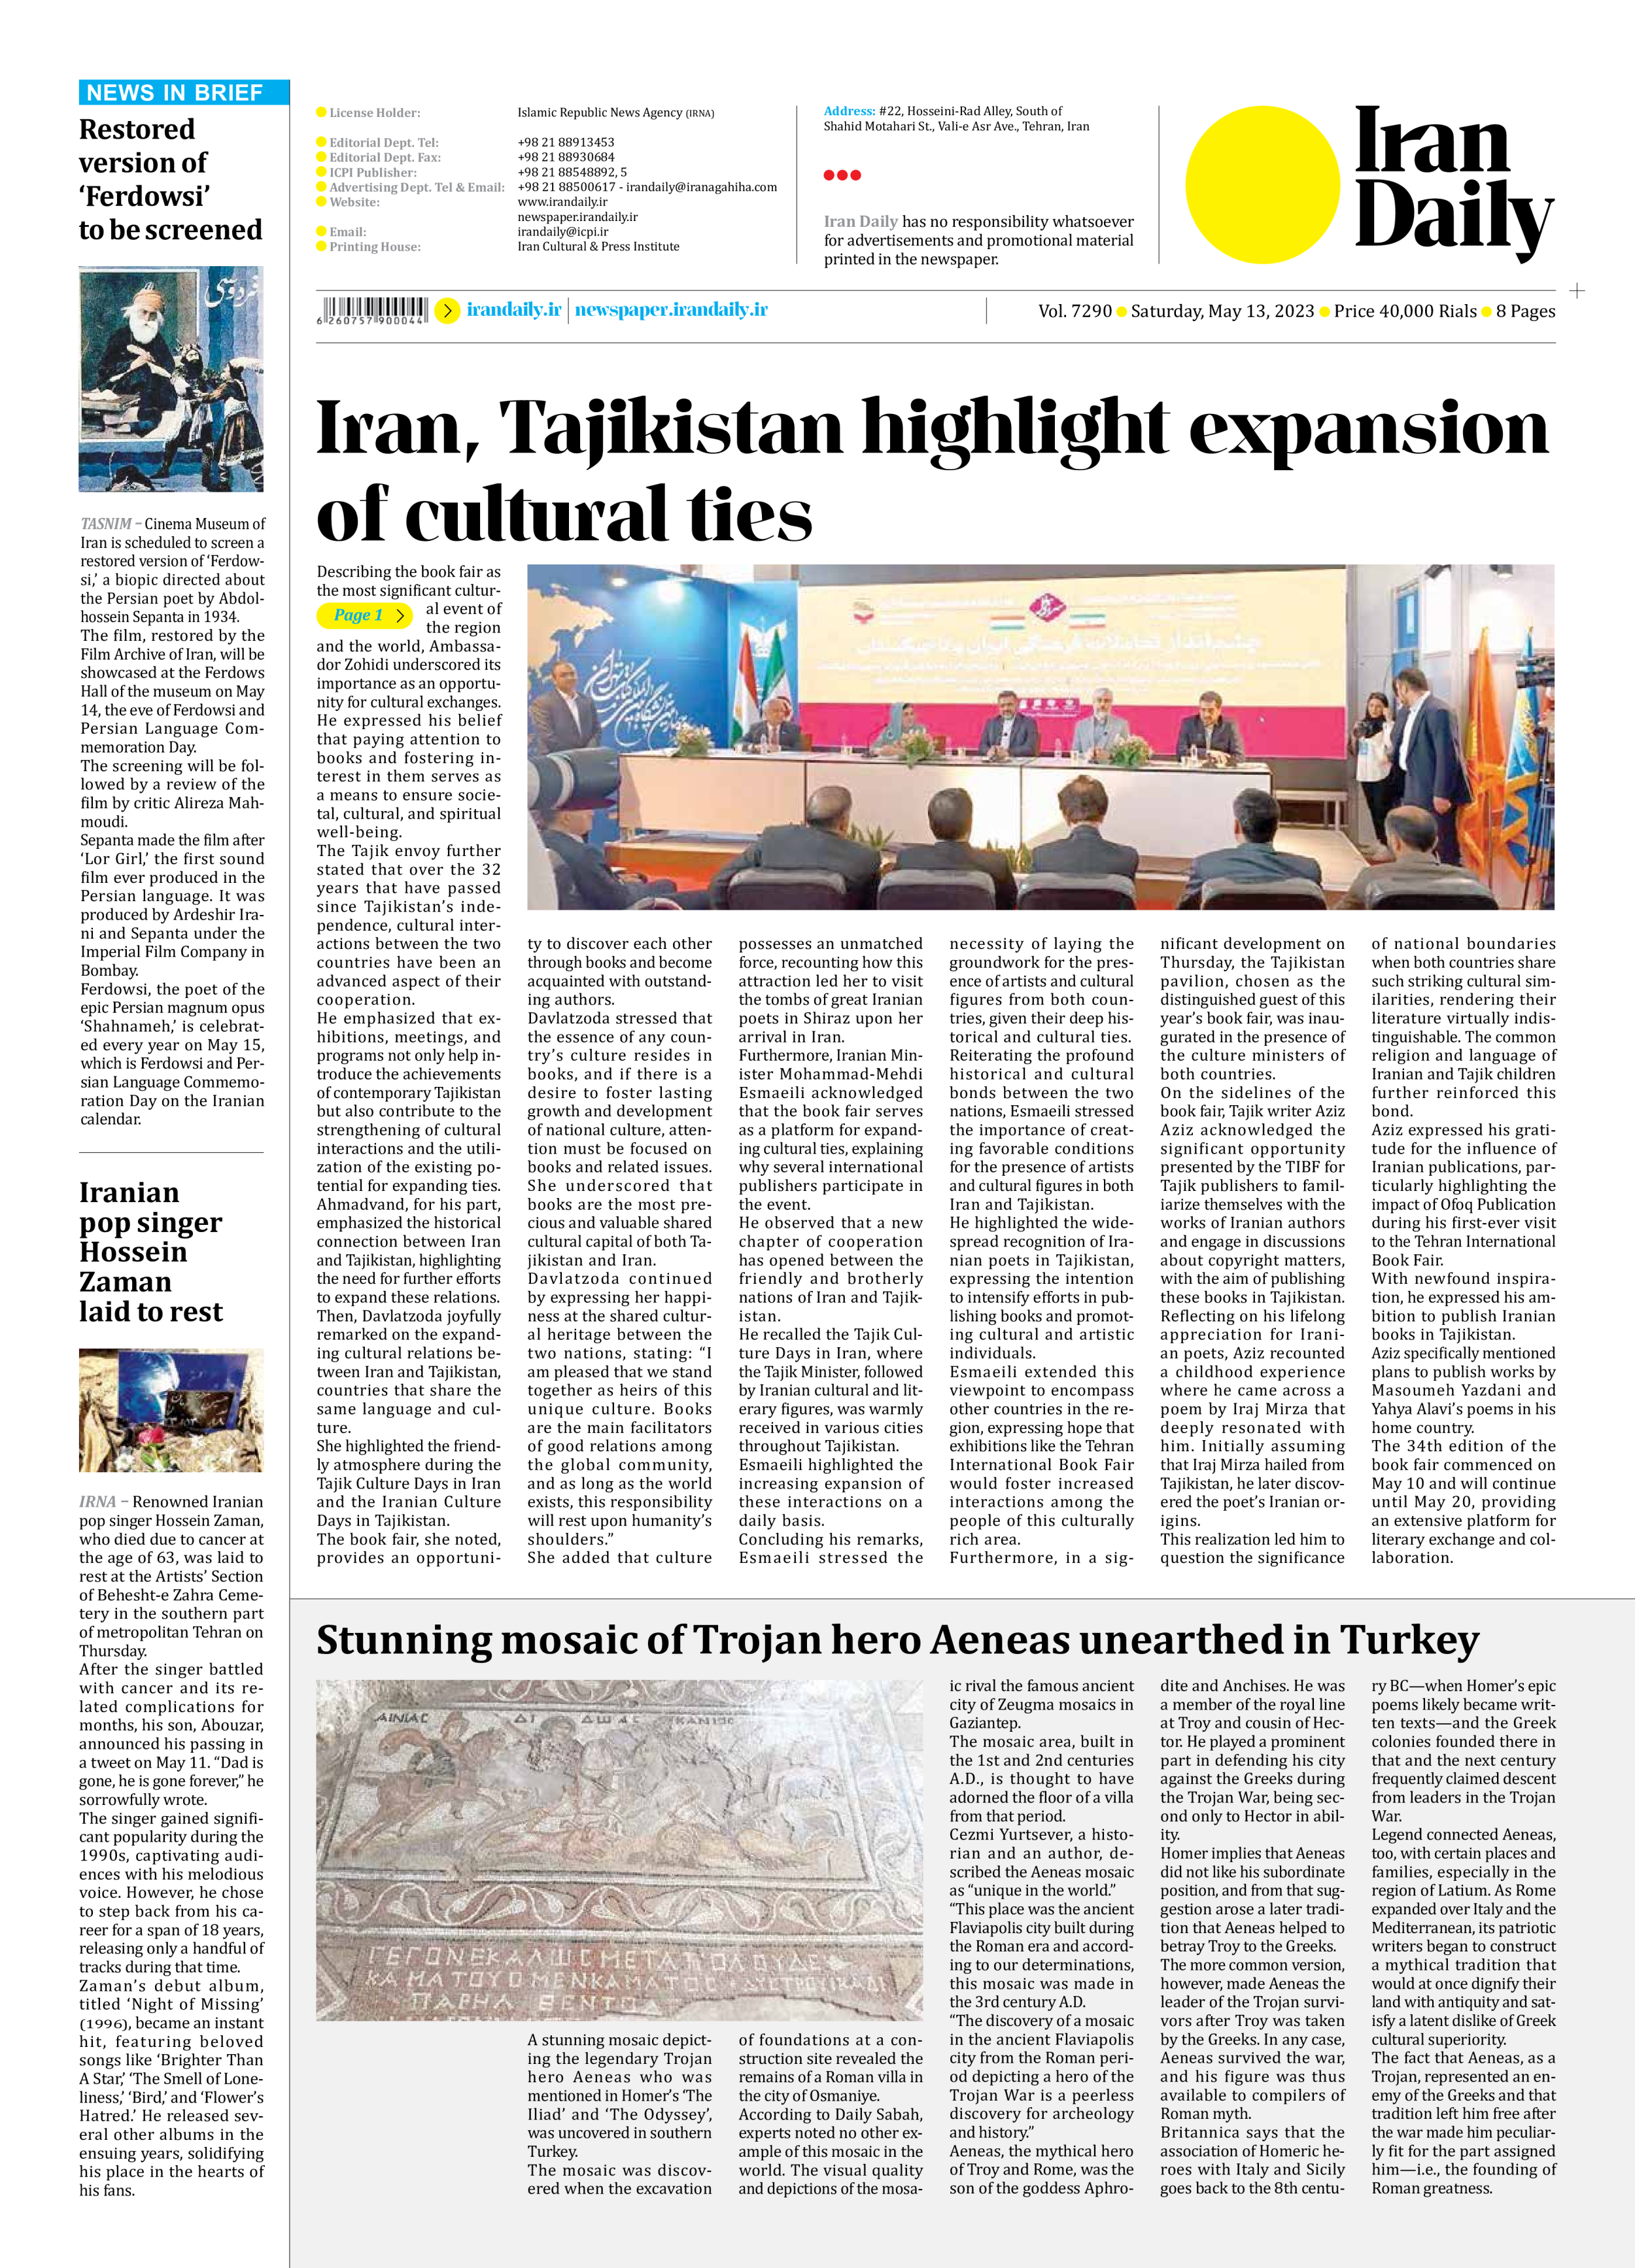 Iran Daily - Number Seven Thousand Two Hundred and Ninety - 13 May 2023 - Page 8